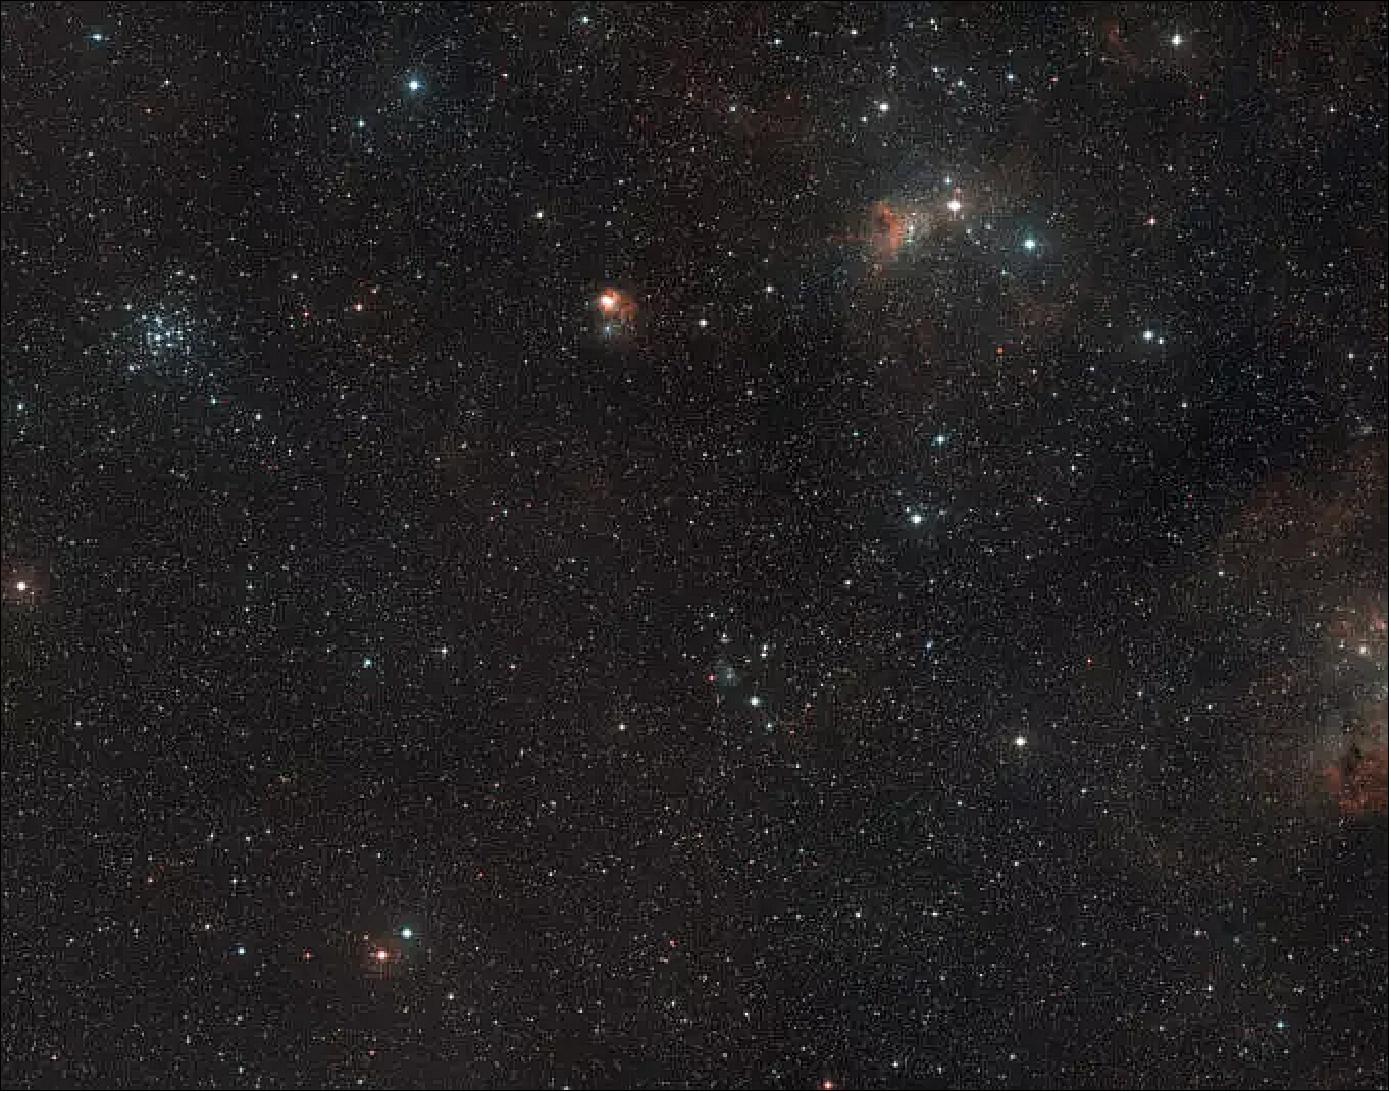 Figure 76: This wide-field view shows the region of the sky, in the constellation of Auriga, where the star-forming region AFGL 5142 is located. This view was created from images forming part of the Digitized Sky Survey 2 (image credit: ESO/Digitized Sky Survey 2. Acknowledgement: Davide De Martin)